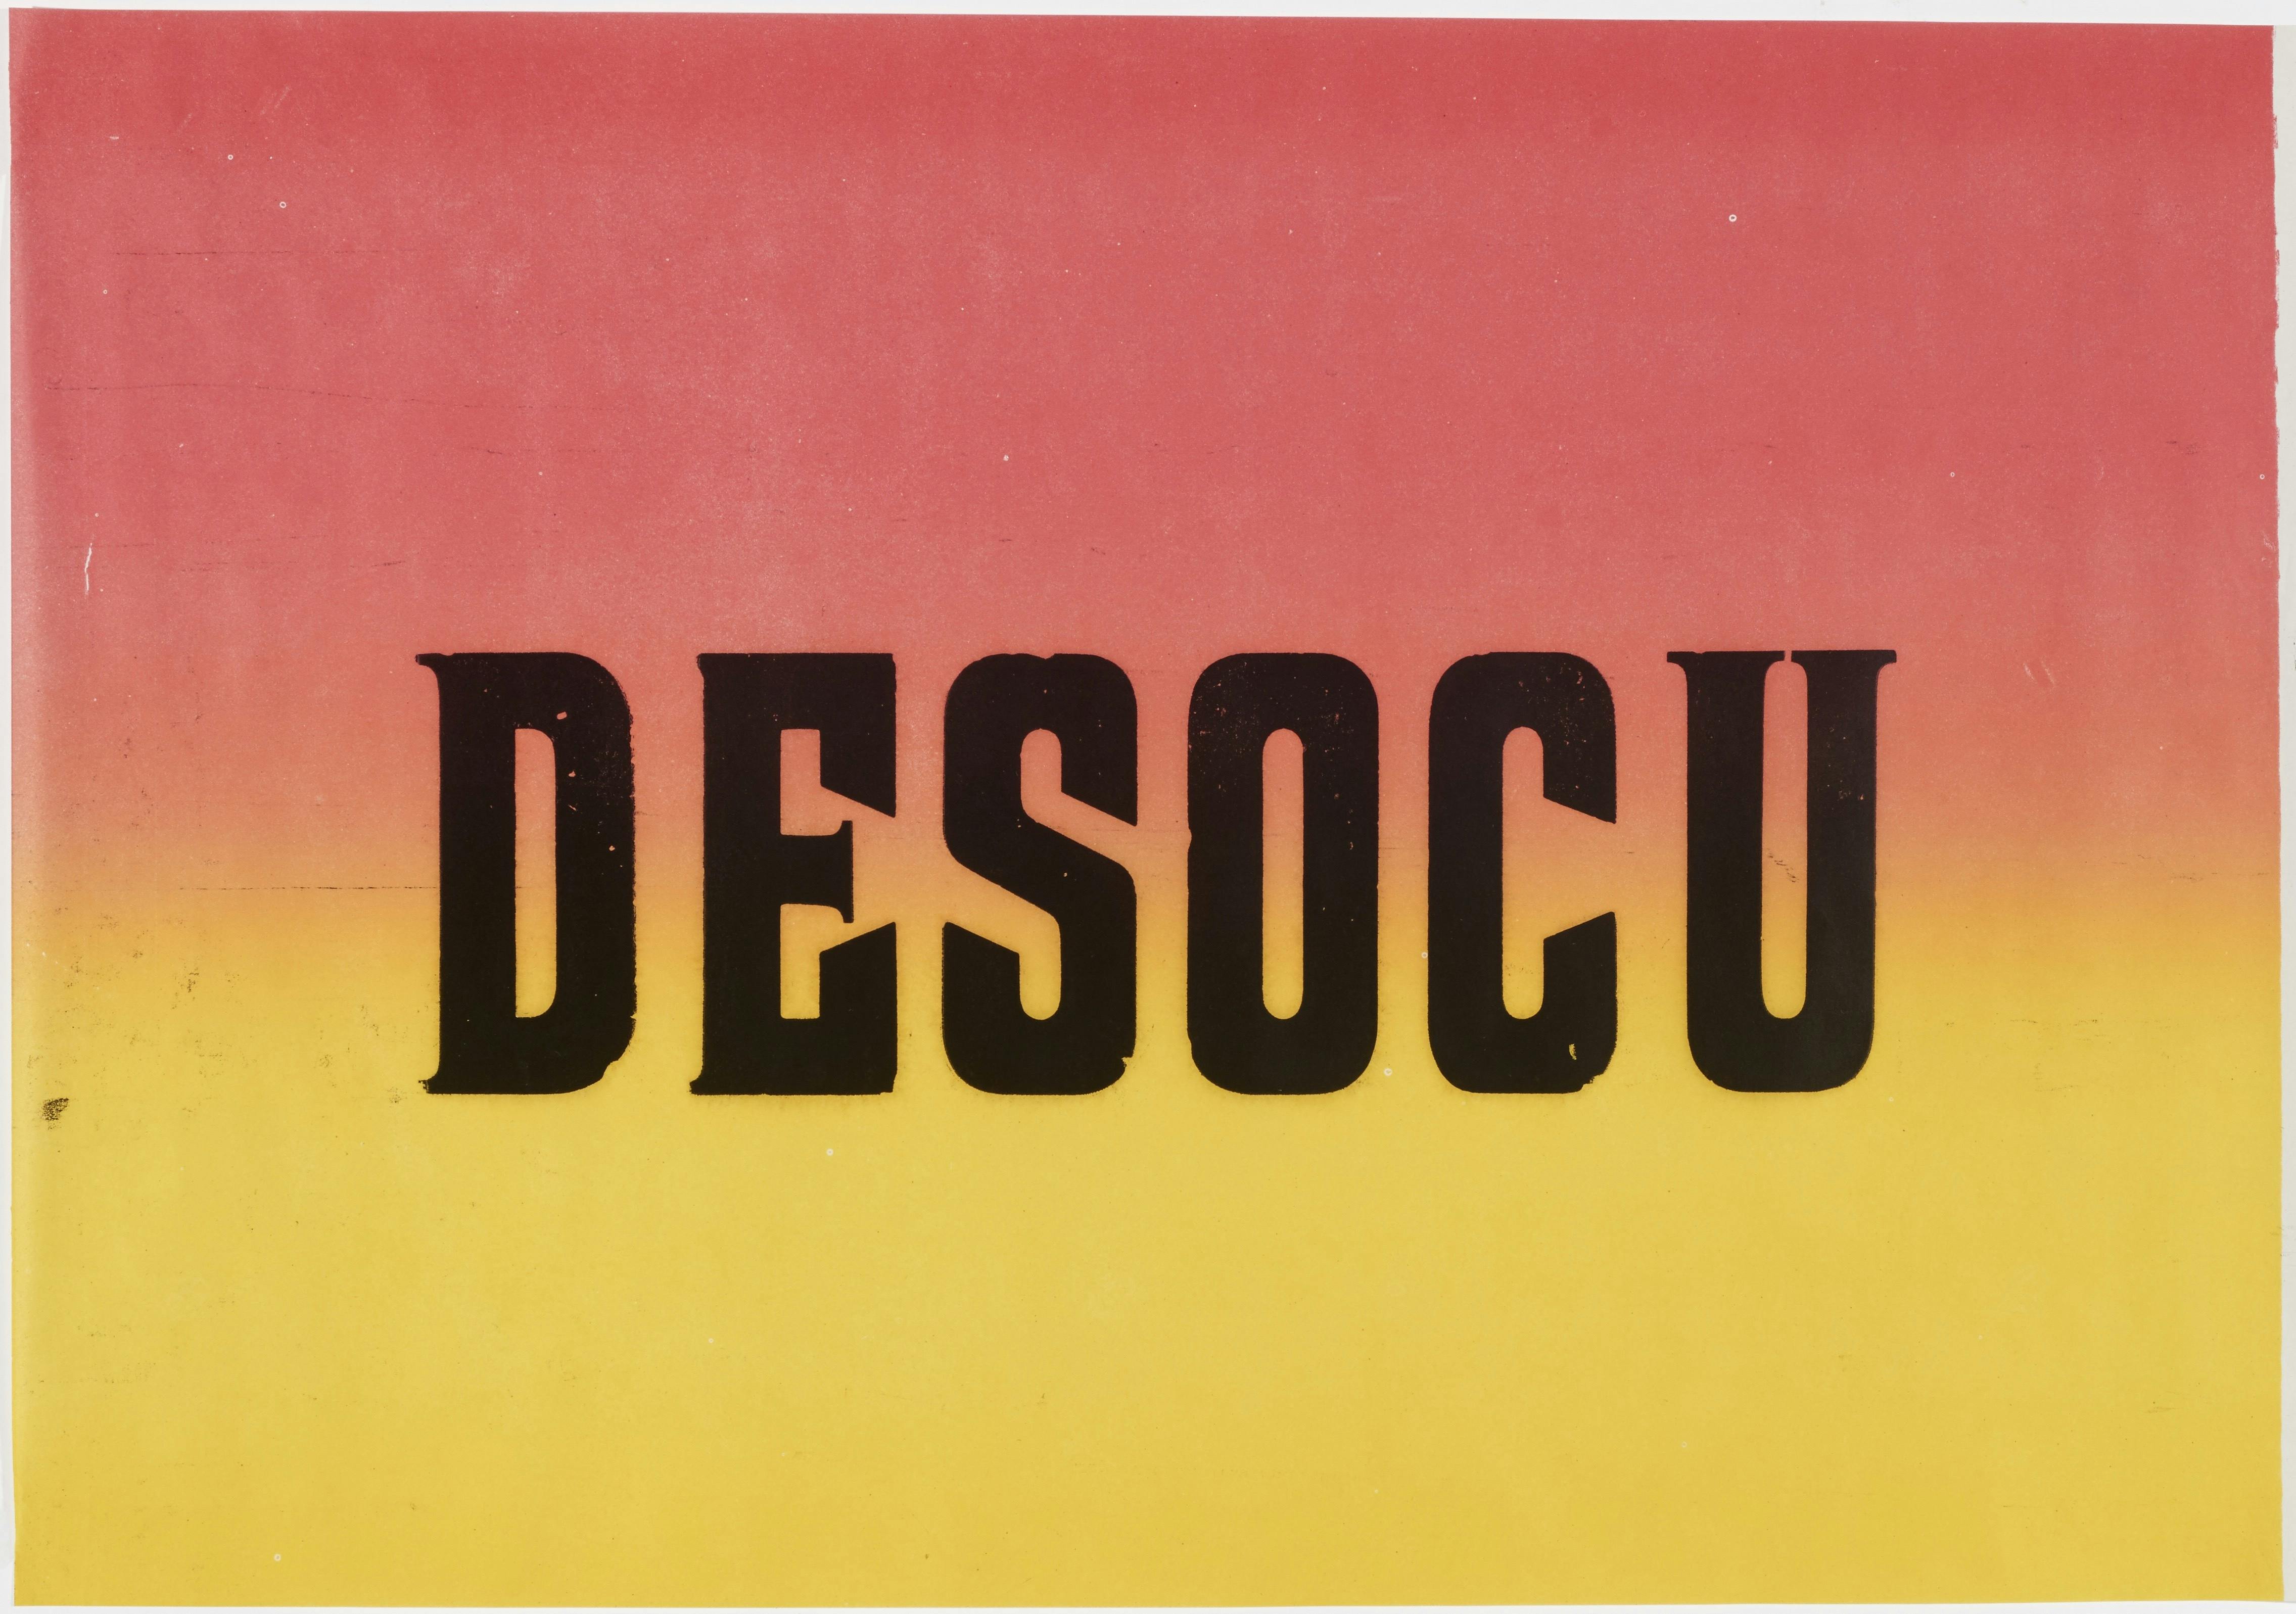 A rectangular poster oriented horizontally. Against a red-yellow gradient backdrop, the word-fragment “DESOCU” is printed in capital block letters in a serif font.